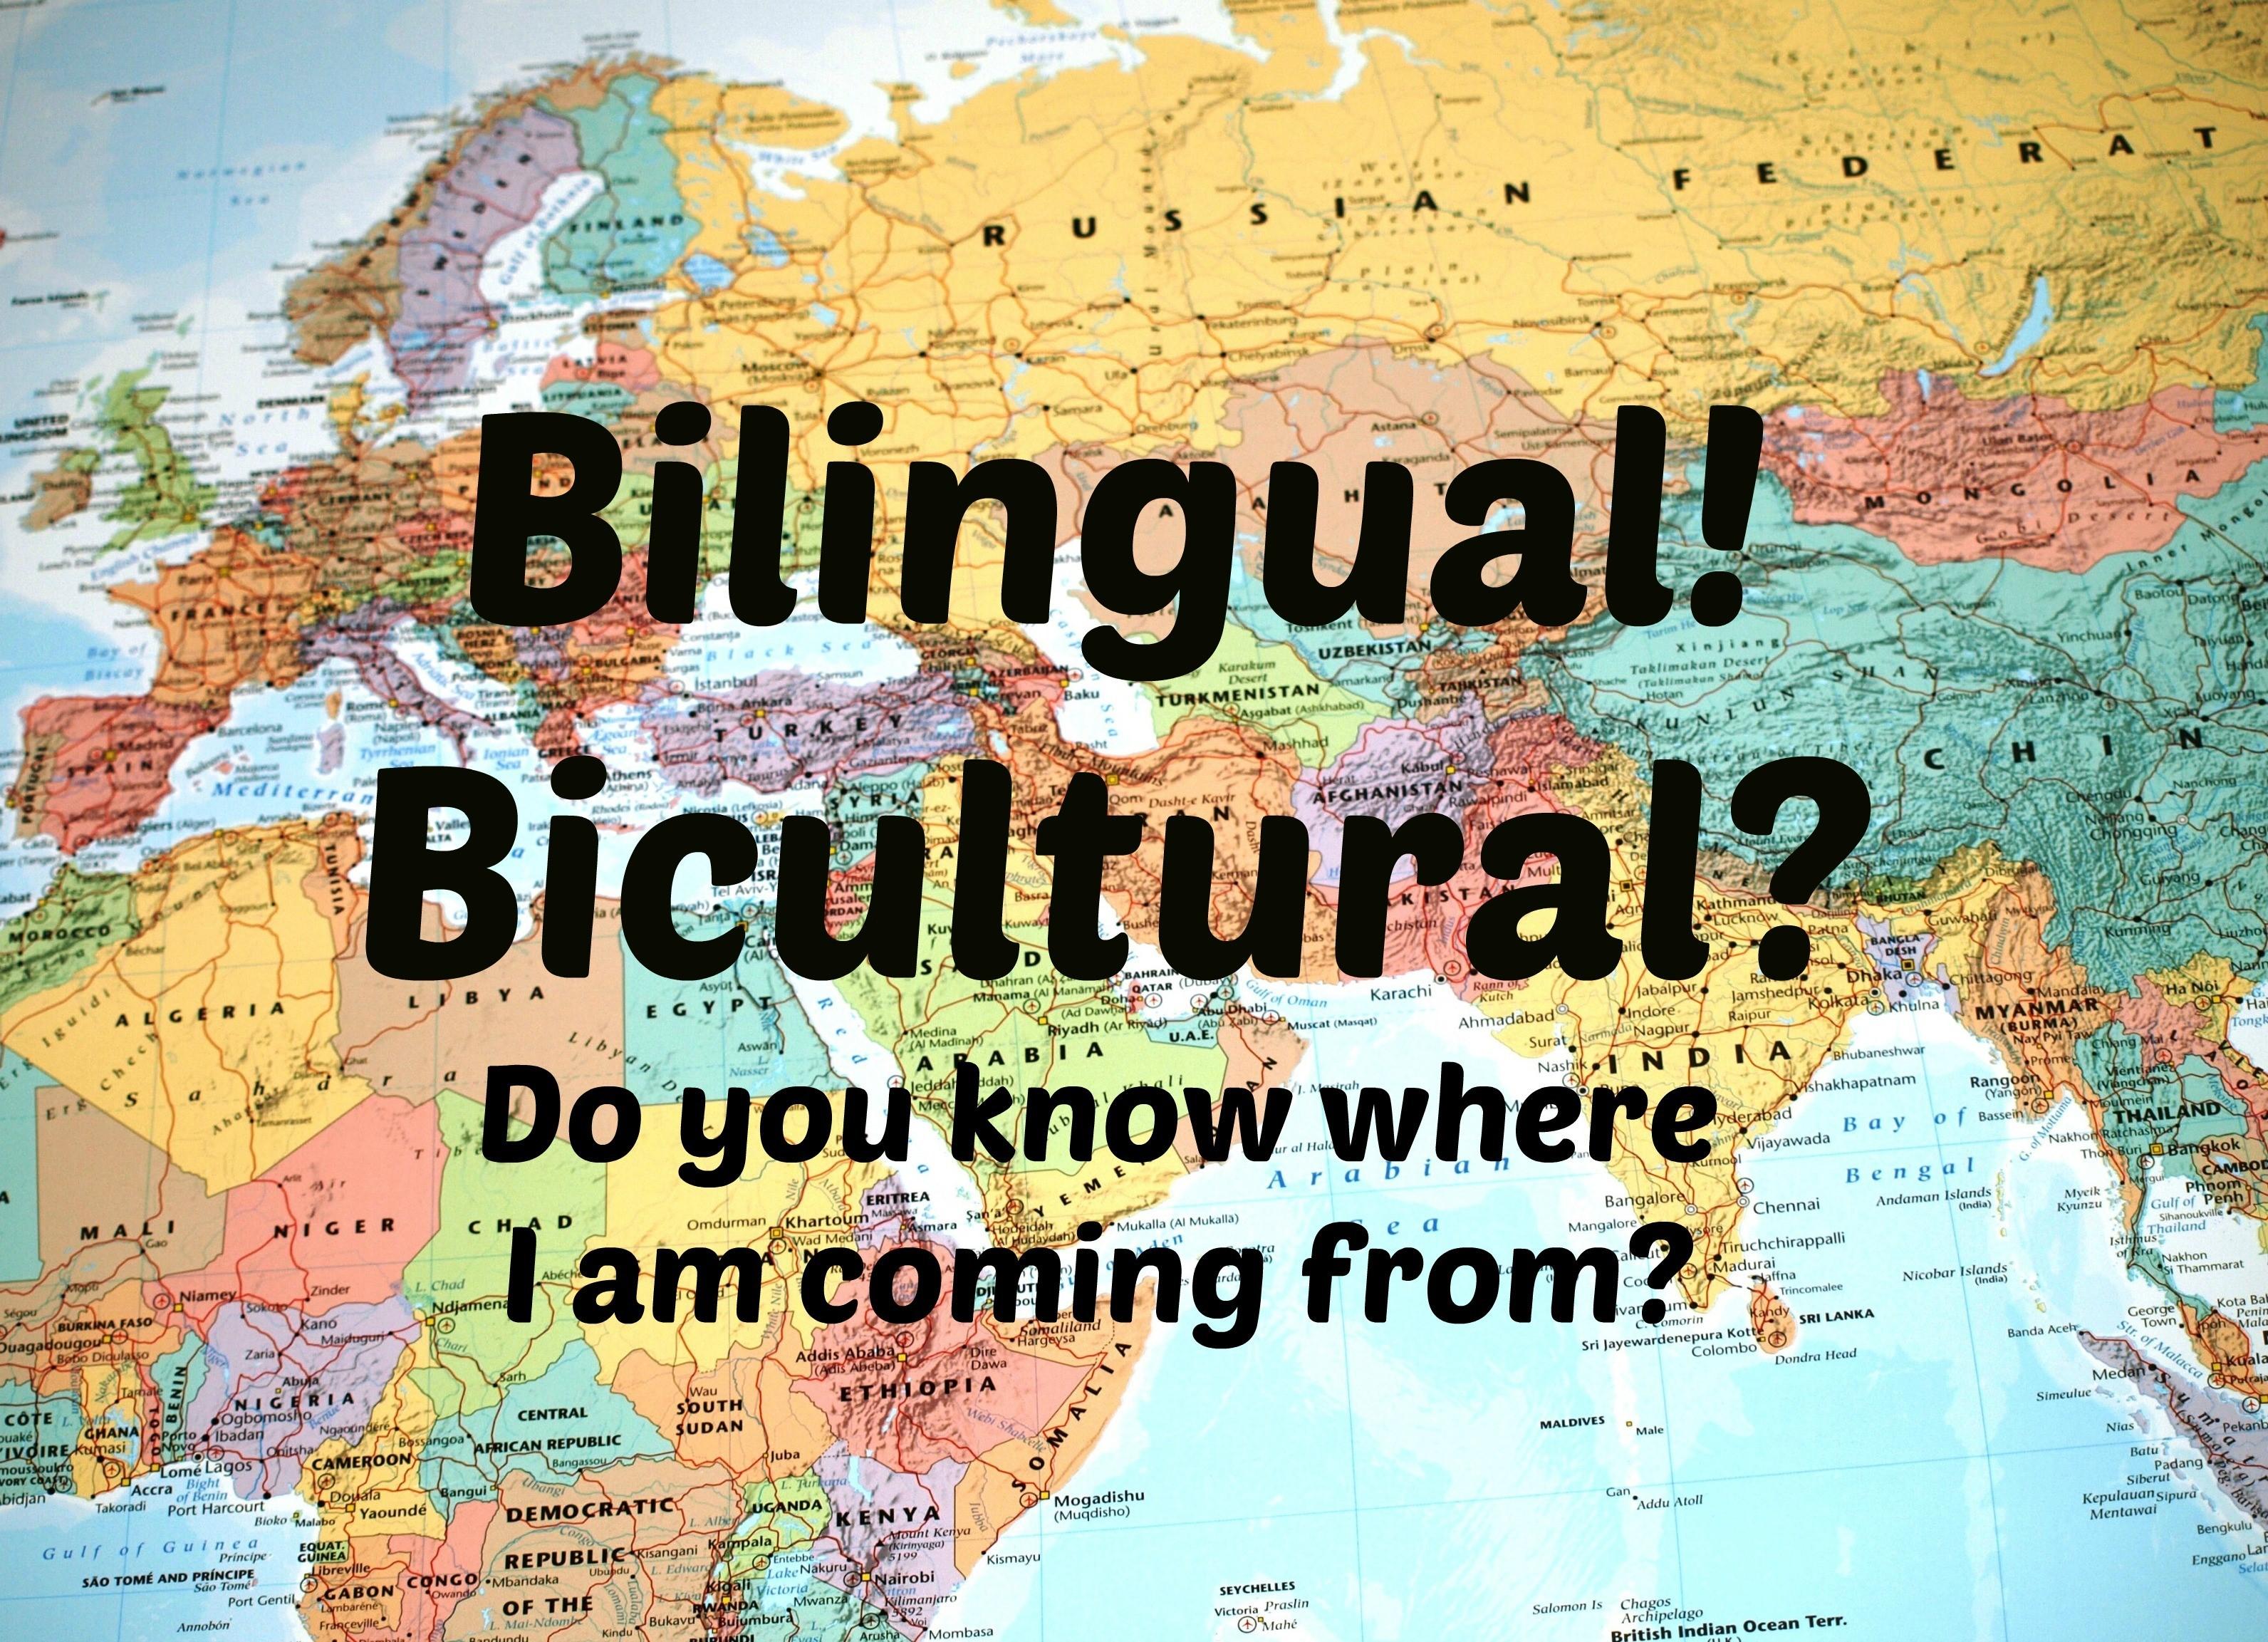 Decoding ‍a Bicultural Critique: Between​ Tradition and Change